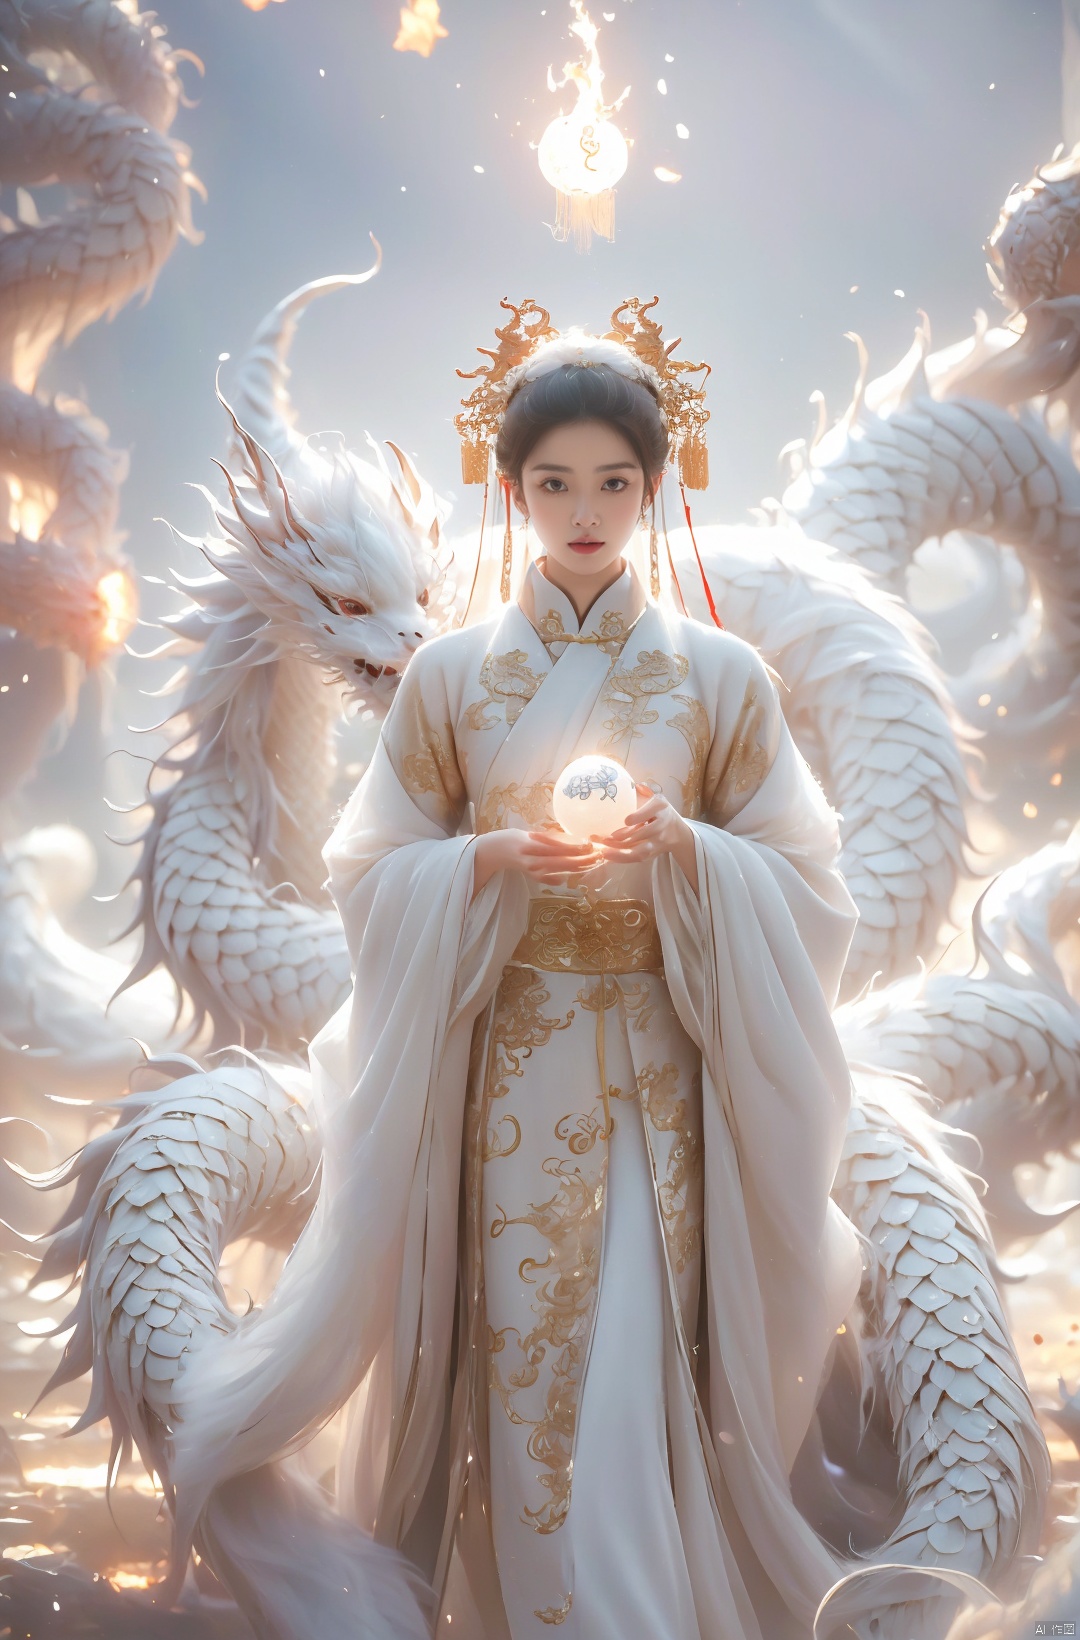  a woman with white hair holding a glowing ball in her hands, white haired deity, by Yang J, heise jinyao, inspired by Zhang Han, xianxia fantasy, flowing gold robes, inspired by Guan Daosheng, human and dragon fusion, cai xukun, inspired by Zhao Yuan, with long white hair, fantasy art style,,Ink scattering_Chinese style, smwuxia Chinese text blood weapon:sw, lotus leaf, (\shen ming shao nv\), gold armor, a boy_gmlwman, wunv, Nine tails, a dragon, lbb, drakan_longdress_dragon crown_headdress